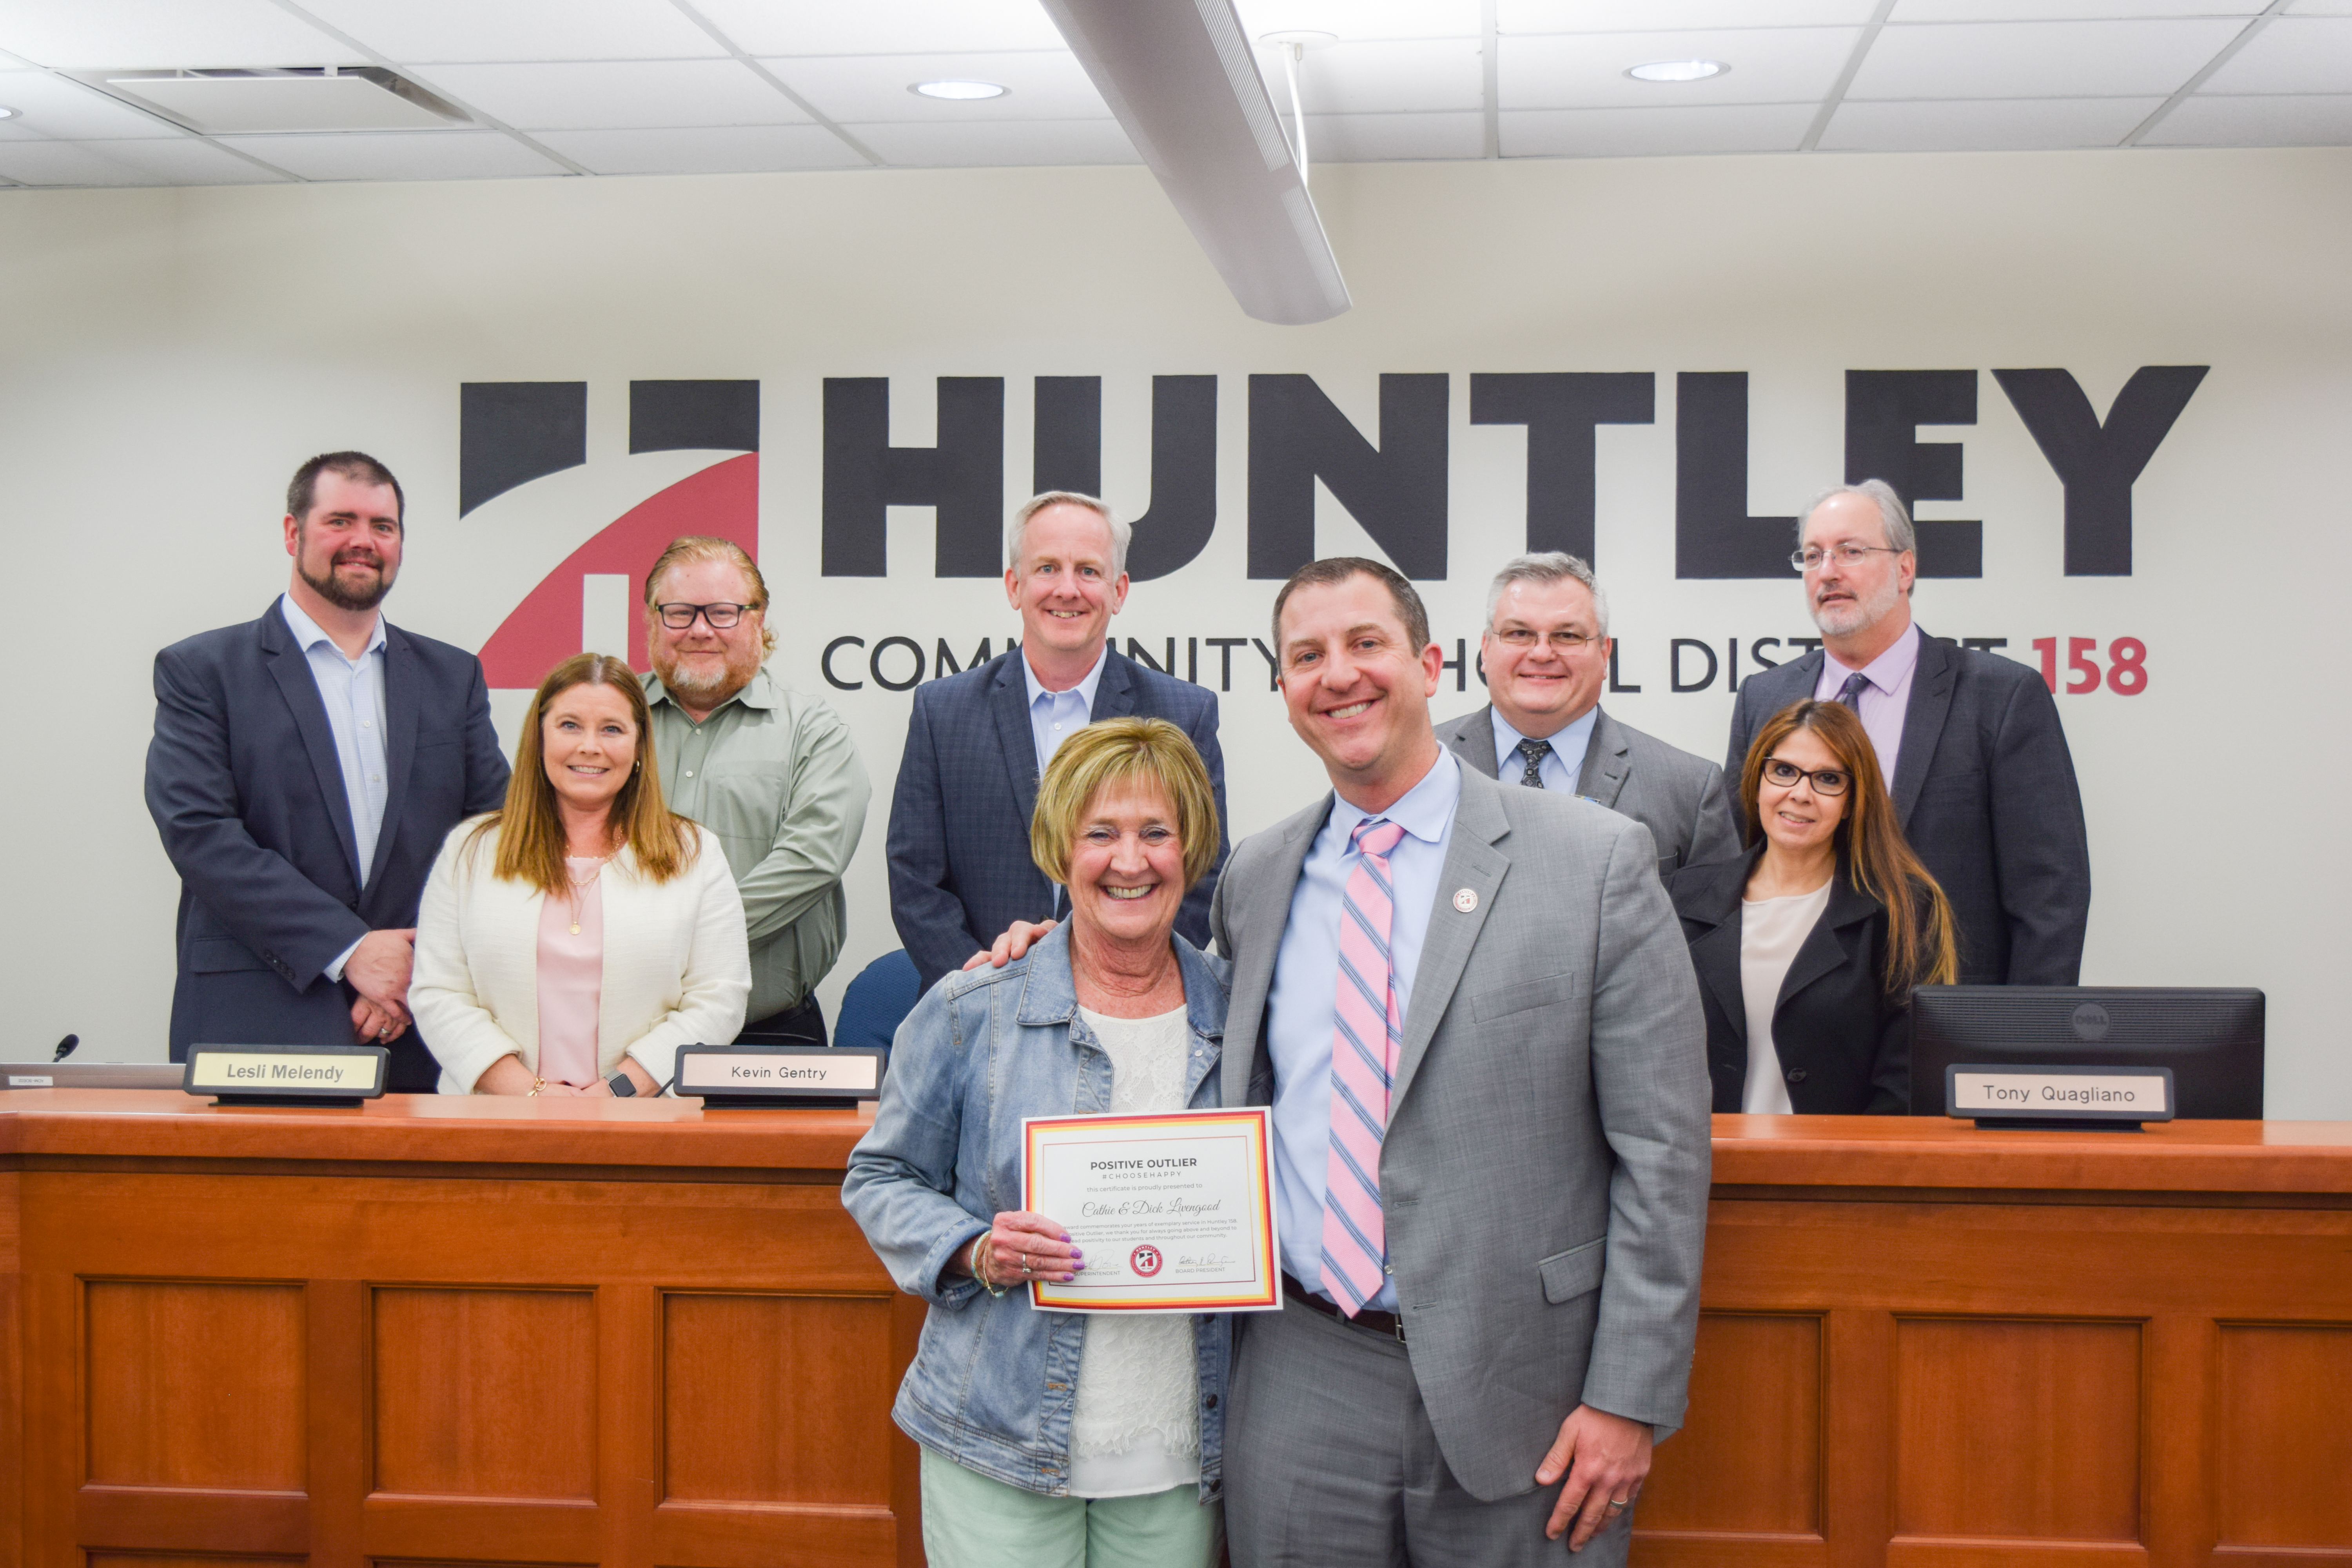 members of the Board with Huntley 158's Positive Outlier, substitute teacher Cathie Livengood